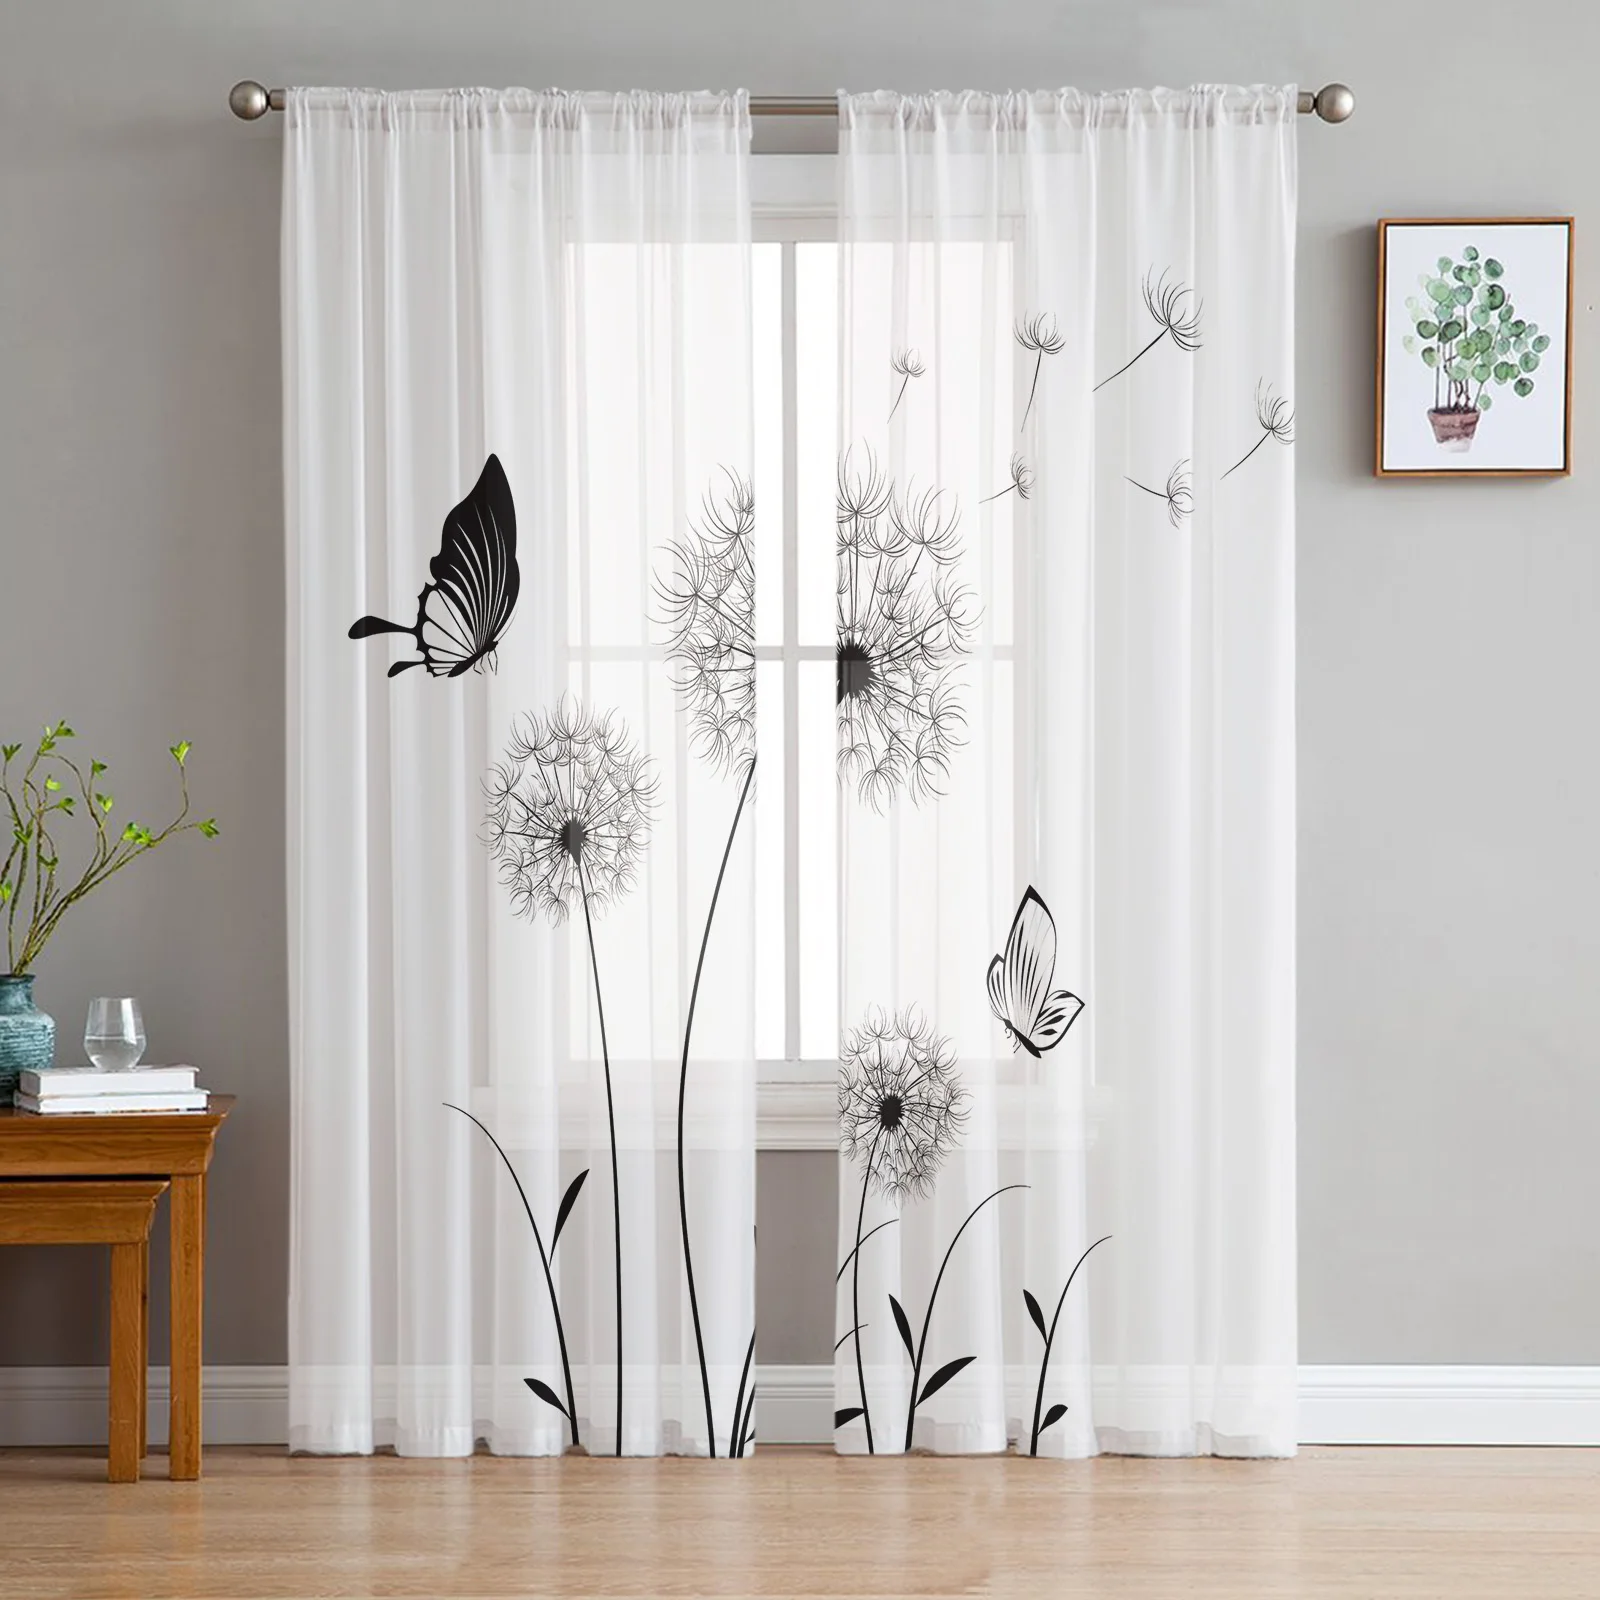 

Dandelion Pattern Tulle Curtains For Living Room Bedroom Decoration Sheer Voile Window Curtains Party Drapes Panels